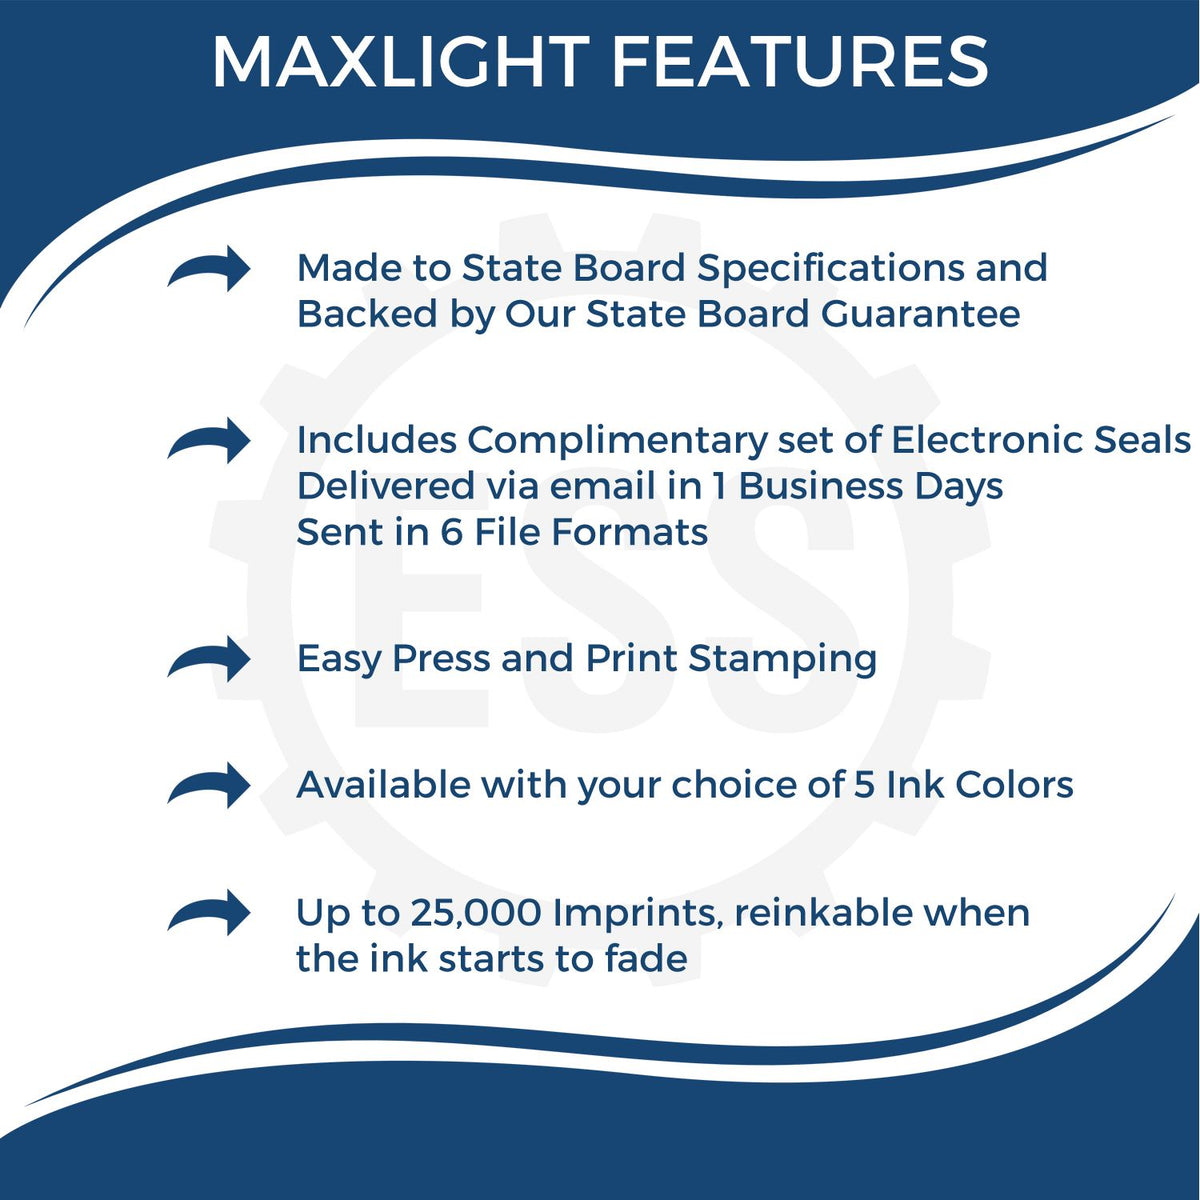 A picture of an infographic highlighting the selling points for the Premium MaxLight Pre-Inked Washington Landscape Architectural Stamp